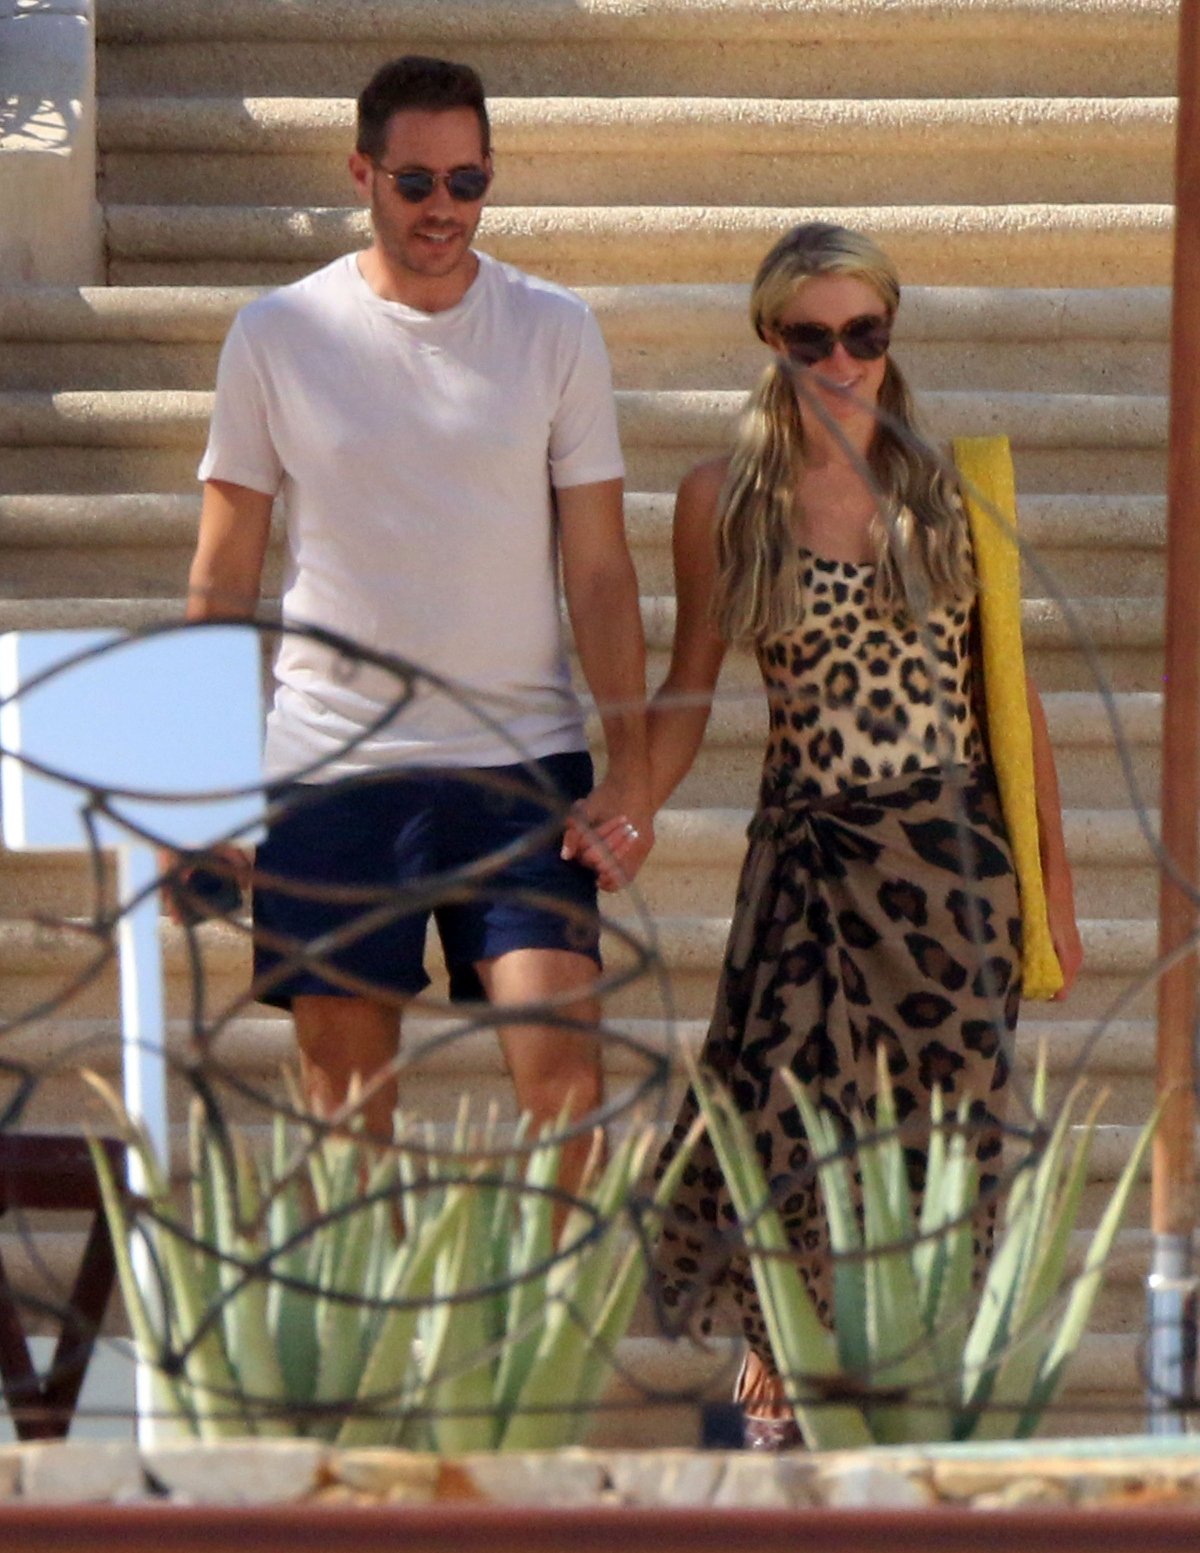 Paris Hilton and Carter Reum hold hands as they walk down a flight of stairs